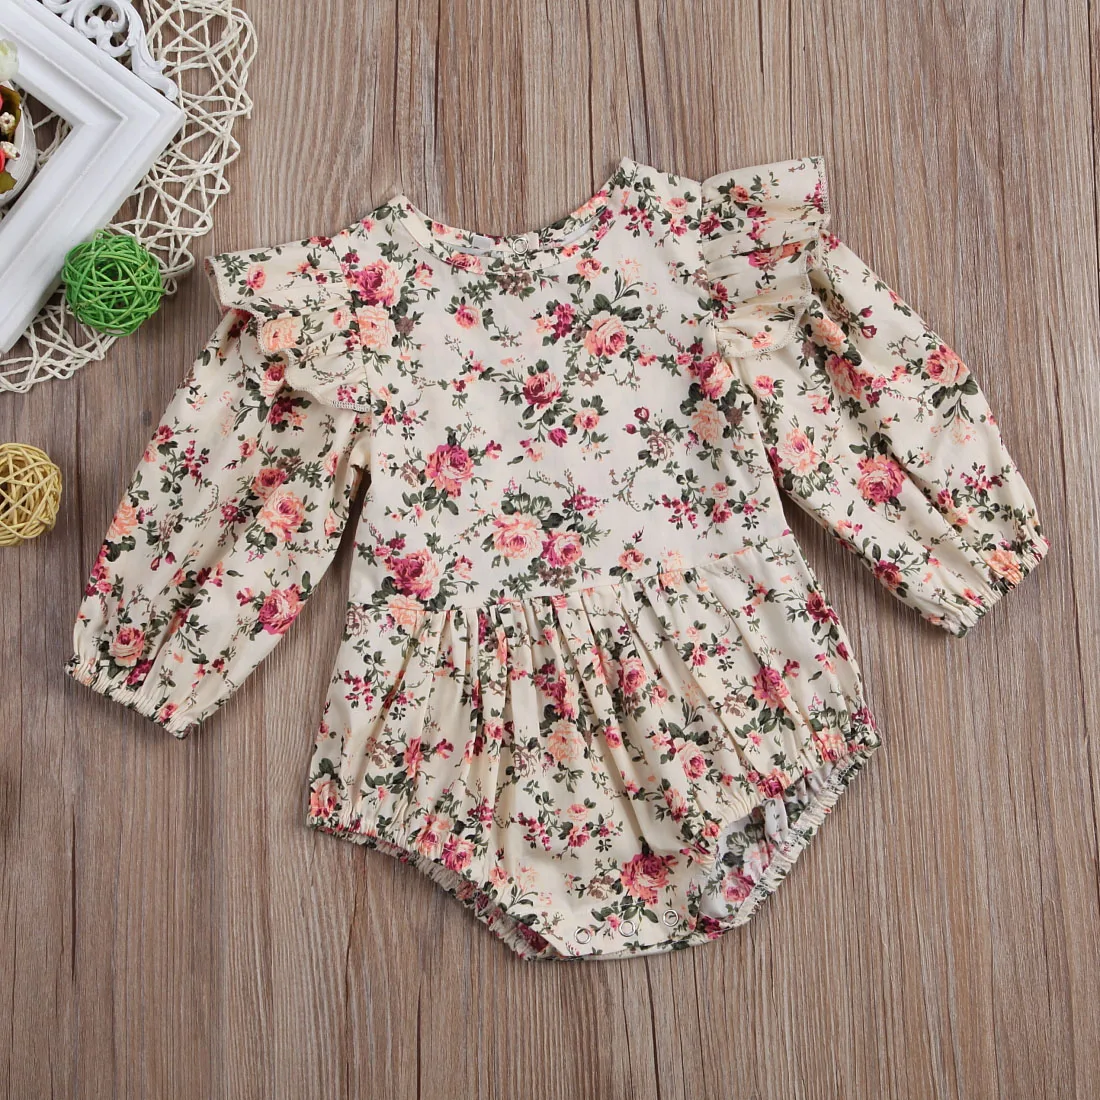 

2021 New Spring and Autume Toddler Baby Girls Long Sleeve Floral Romper Jumpsuit Outfits Bodysuit Clothes